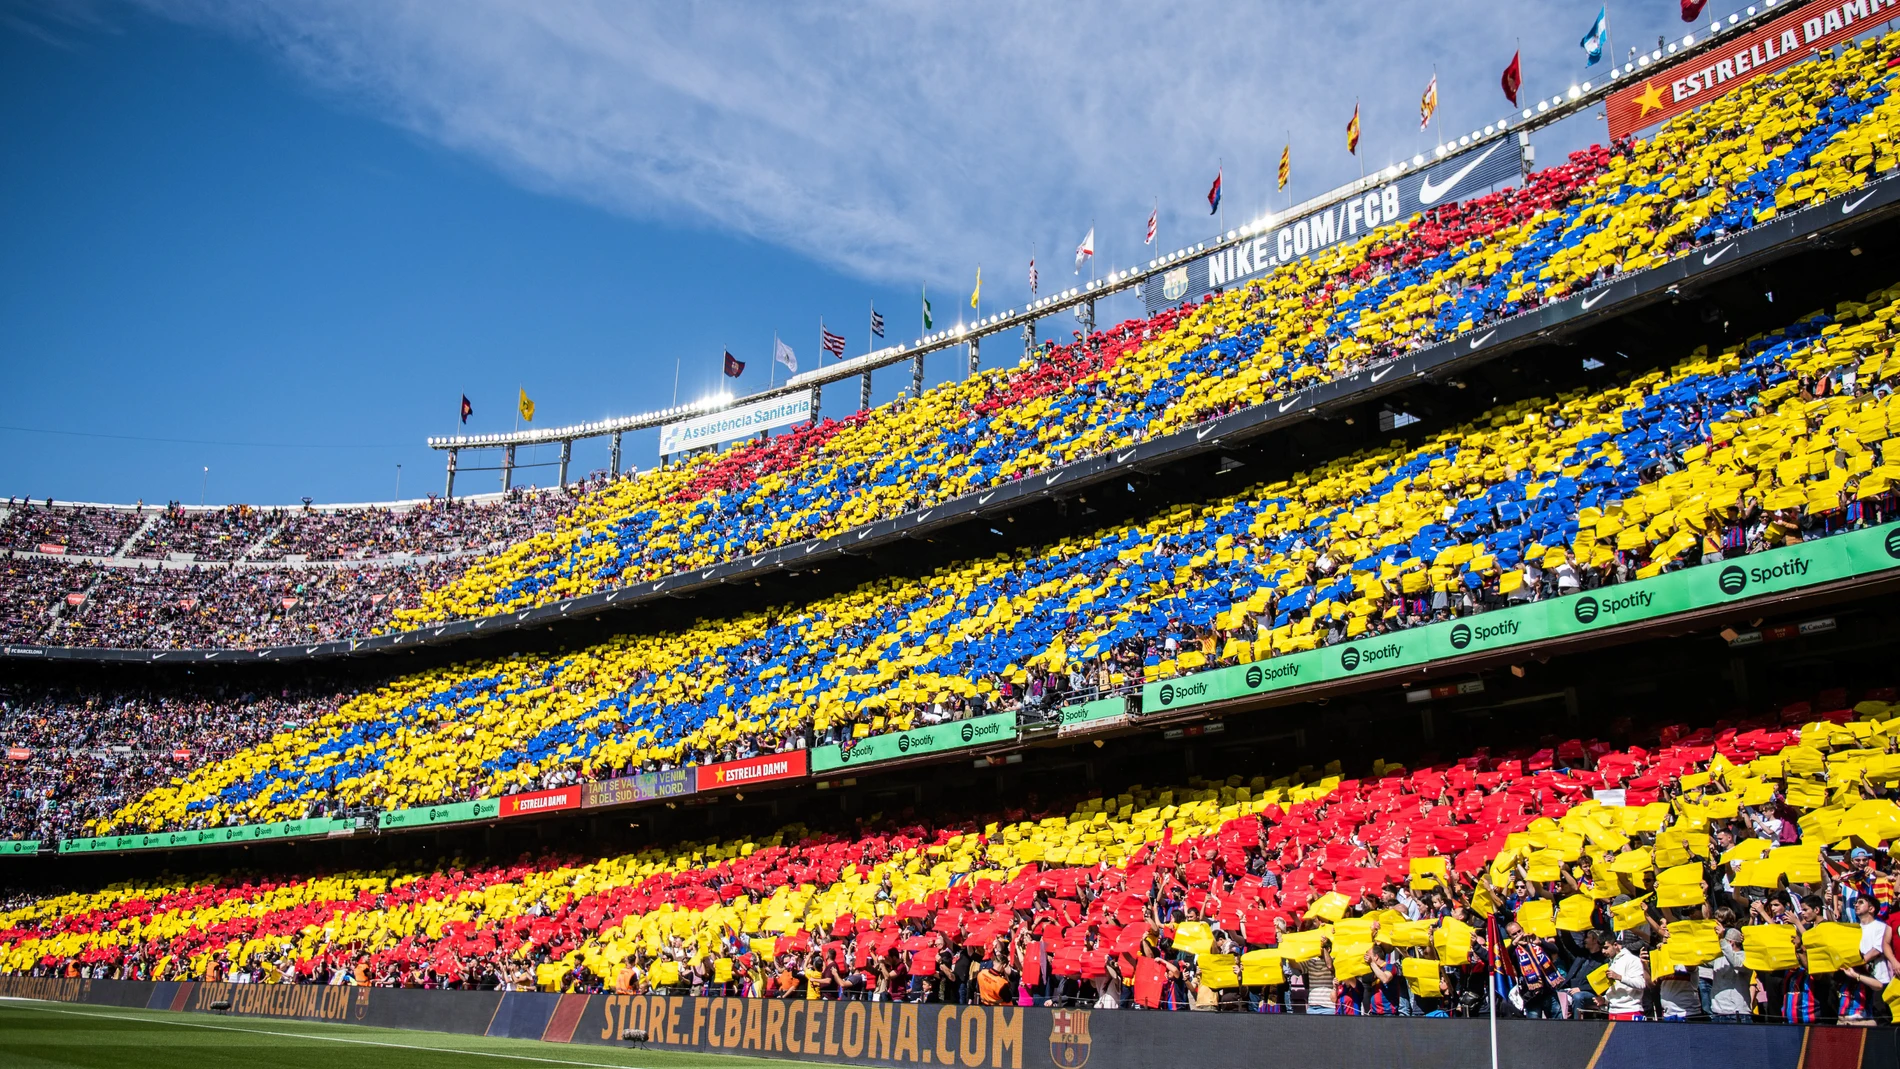 FC Barcelona supporters on the stands during the spanish league, La Liga Santander, football match played between FC Barcelona and Atletico de Madrid at Spotify Camp Nou stadium on April 23, 2023, in Barcelona, Spain.
Marc Graupera Aloma / Afp7 
23/04/2023 ONLY FOR USE IN SPAIN